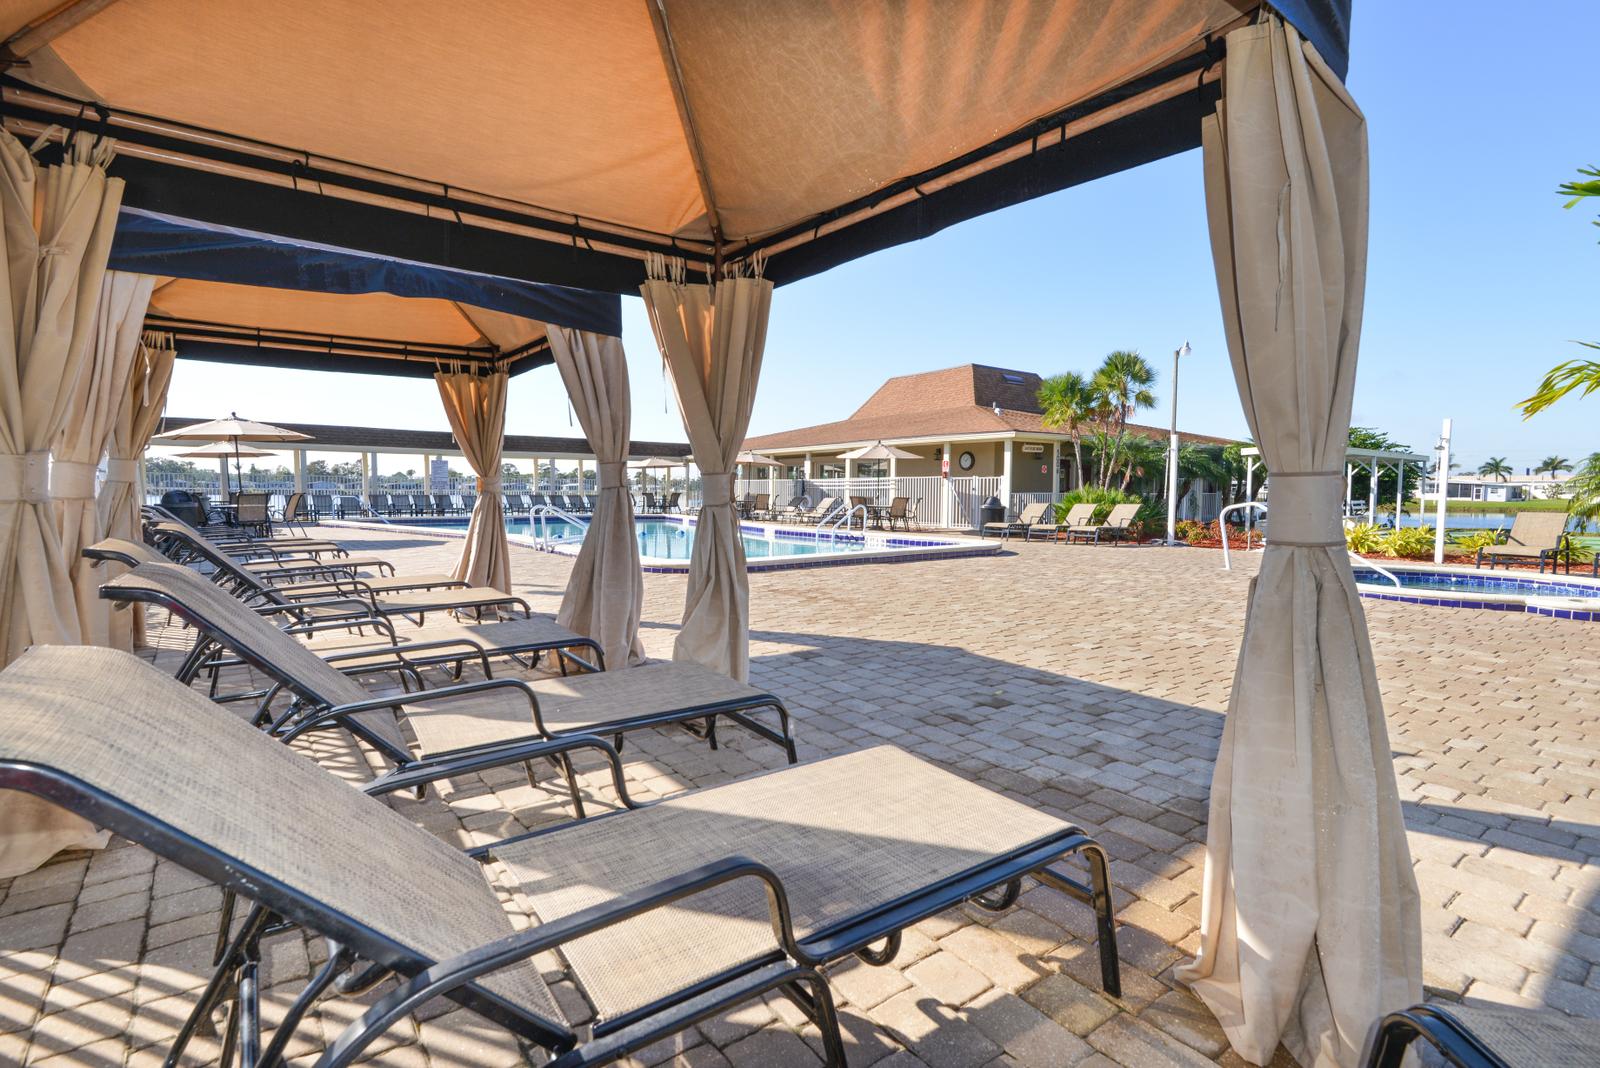 Large cabanas with lounge chairs offer shad in pool area.